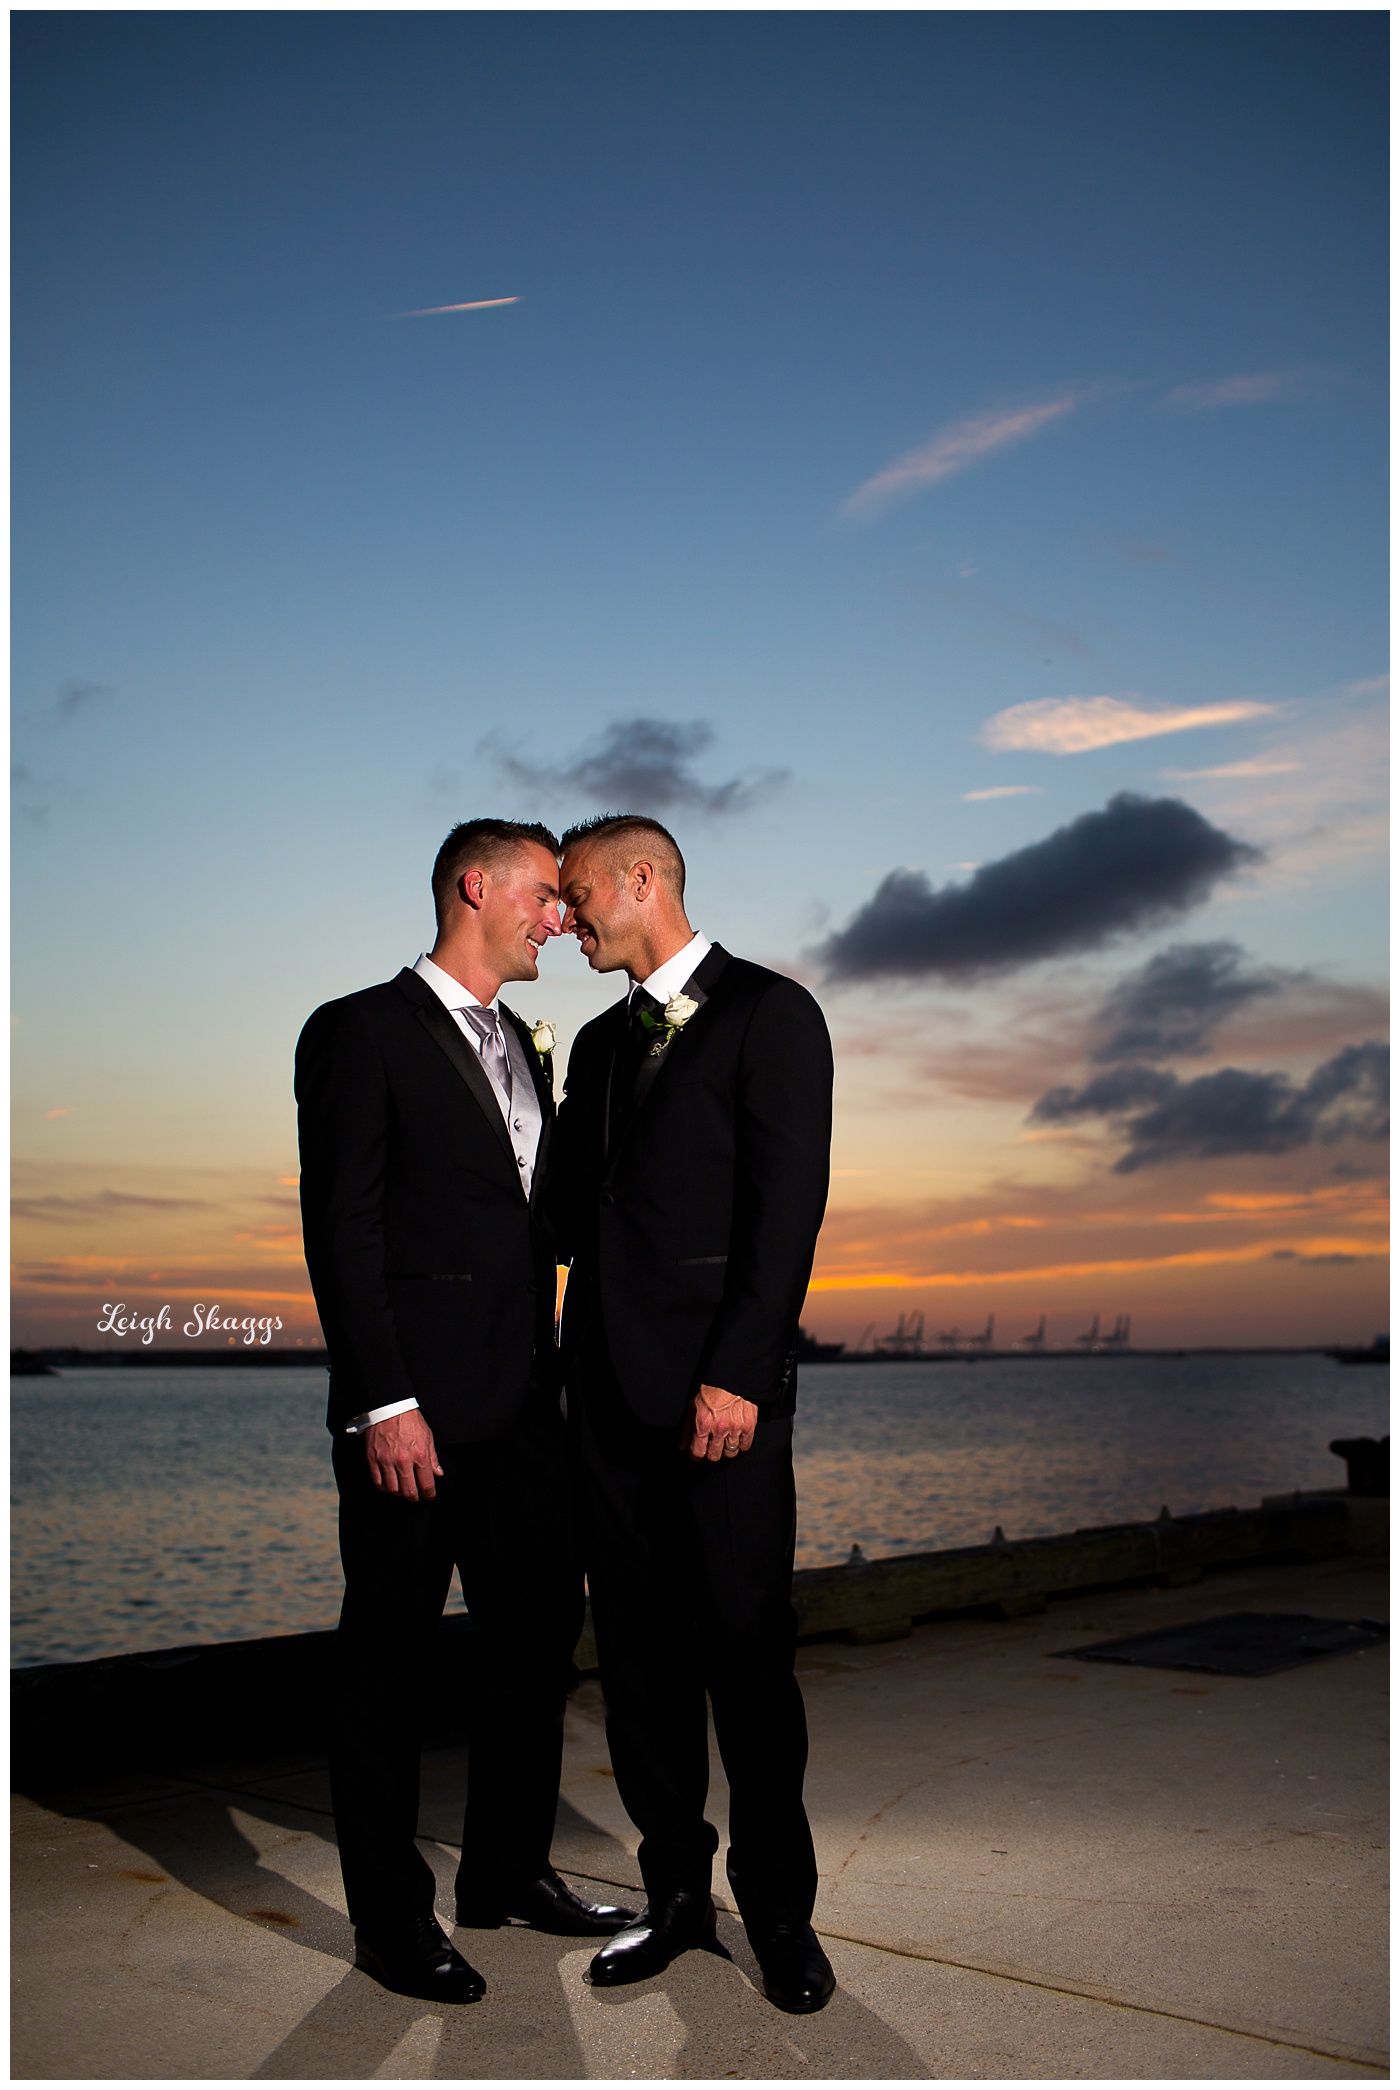 David and Tim are Married!  A sneak peek from the Half Moone